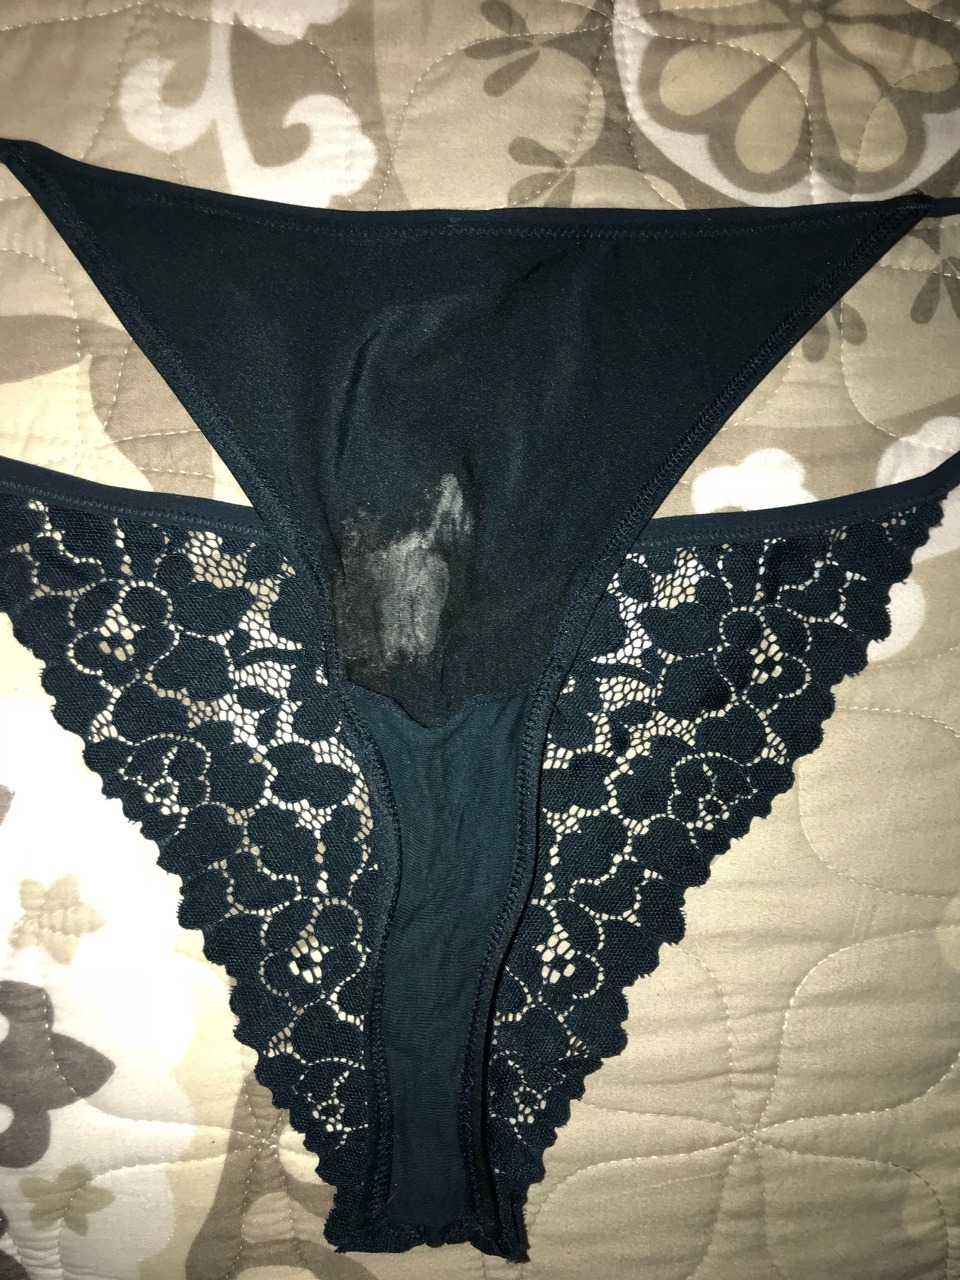 Dirty panties tumblr wifes I sniffed